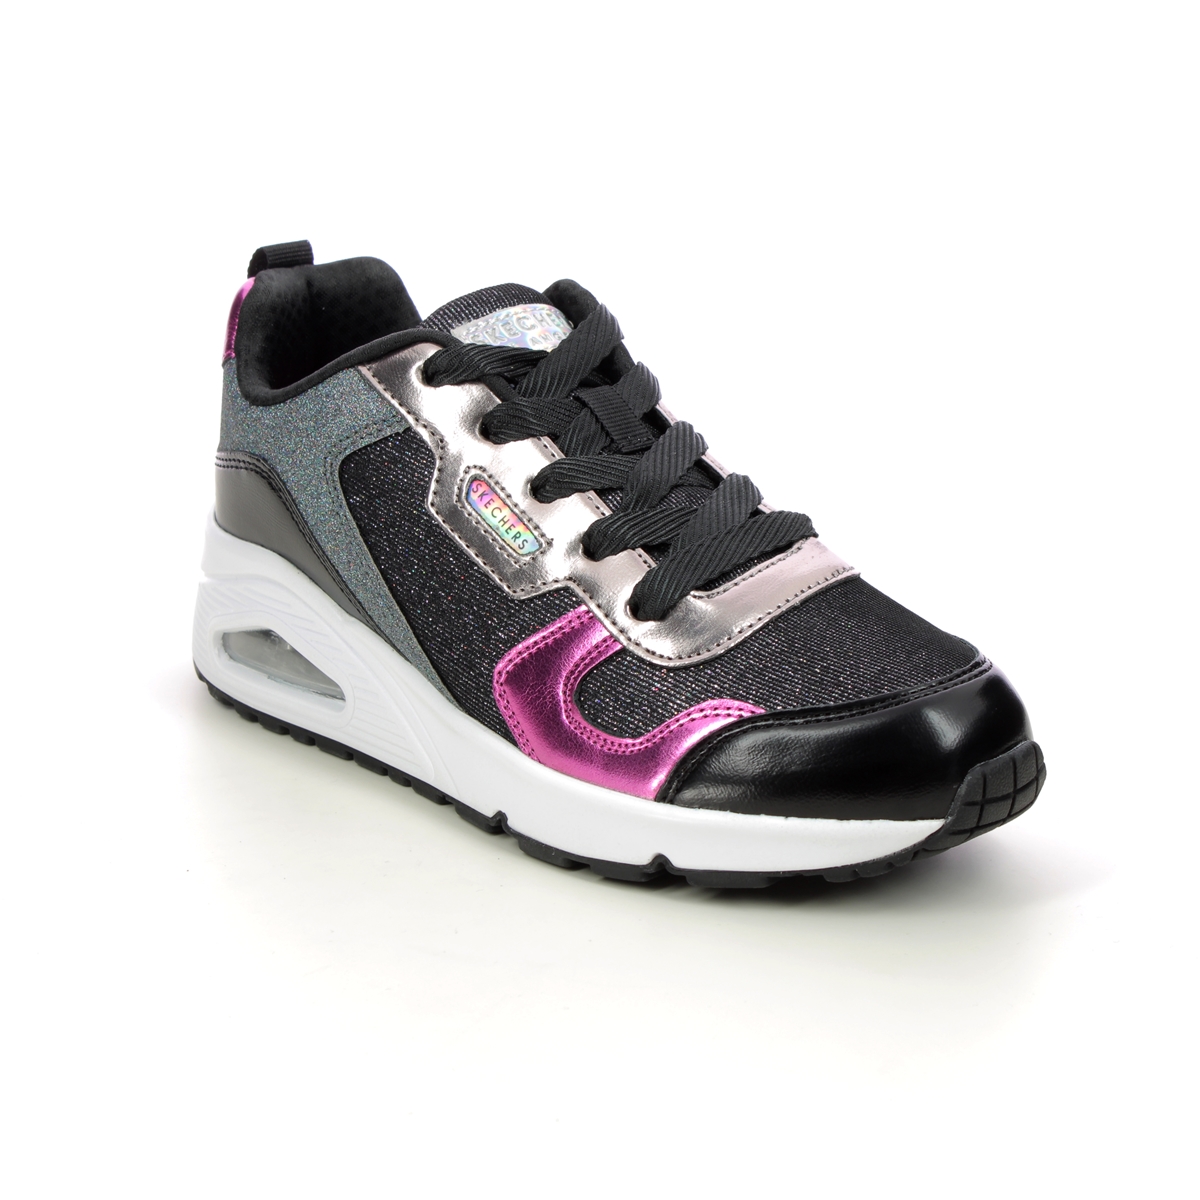 Skechers Uno Remix Lace Black Kids Girls Trainers 310513L In Size 37 In Plain Black For kids